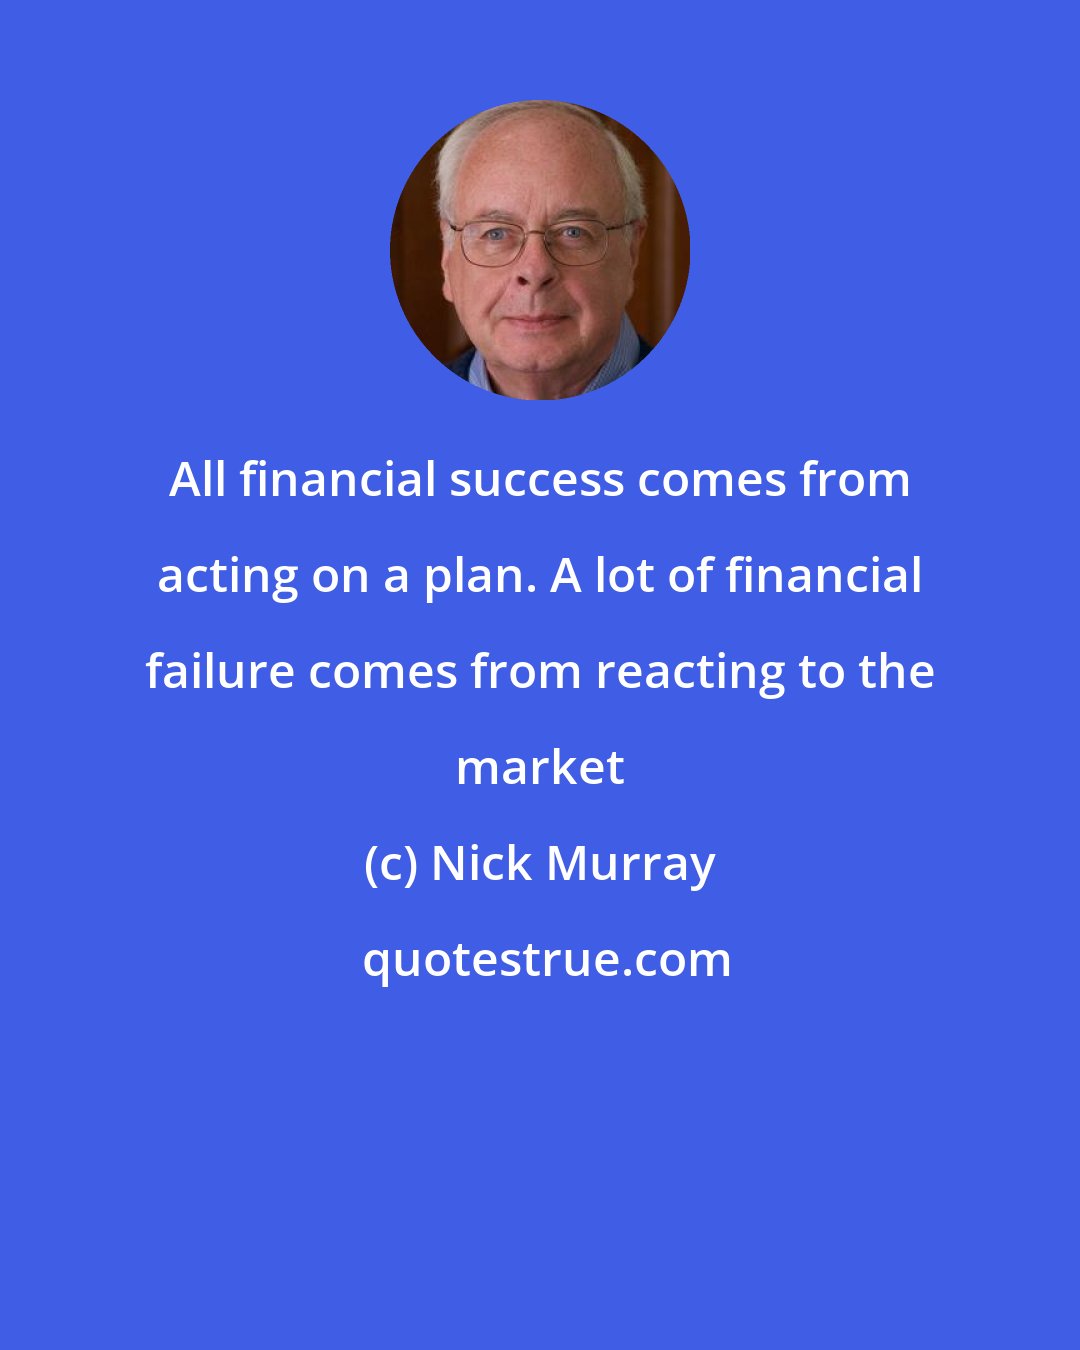 Nick Murray: All financial success comes from acting on a plan. A lot of financial failure comes from reacting to the market